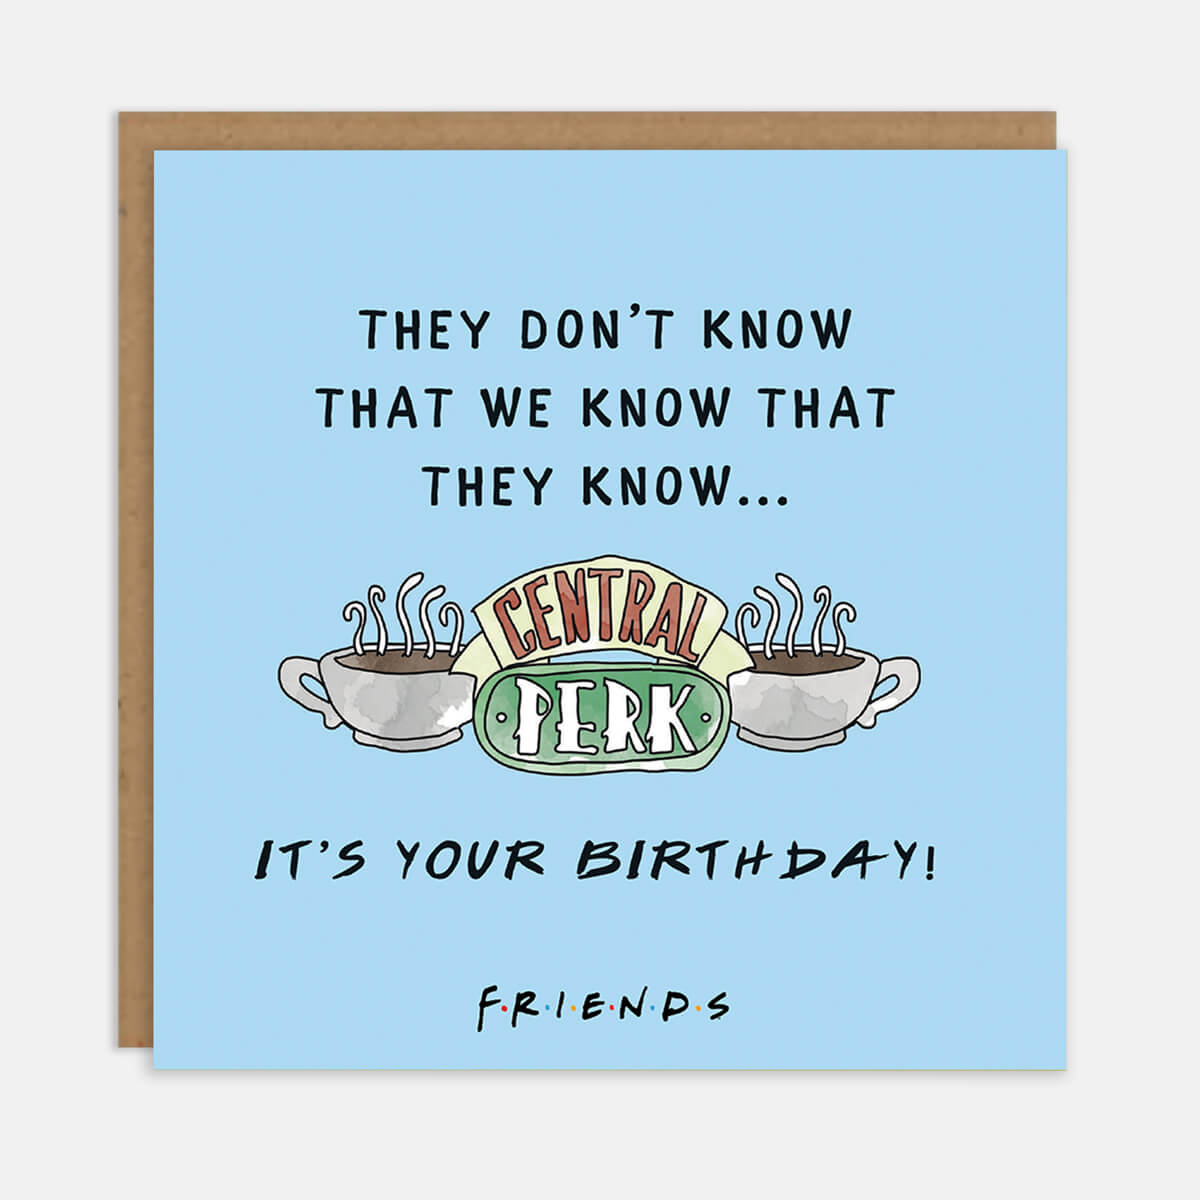 Friends TV Show Birthday Card - Friends Merchandise - They Don't Know That We Know That They Know...It's Your Birthday" pastel blue card with black text